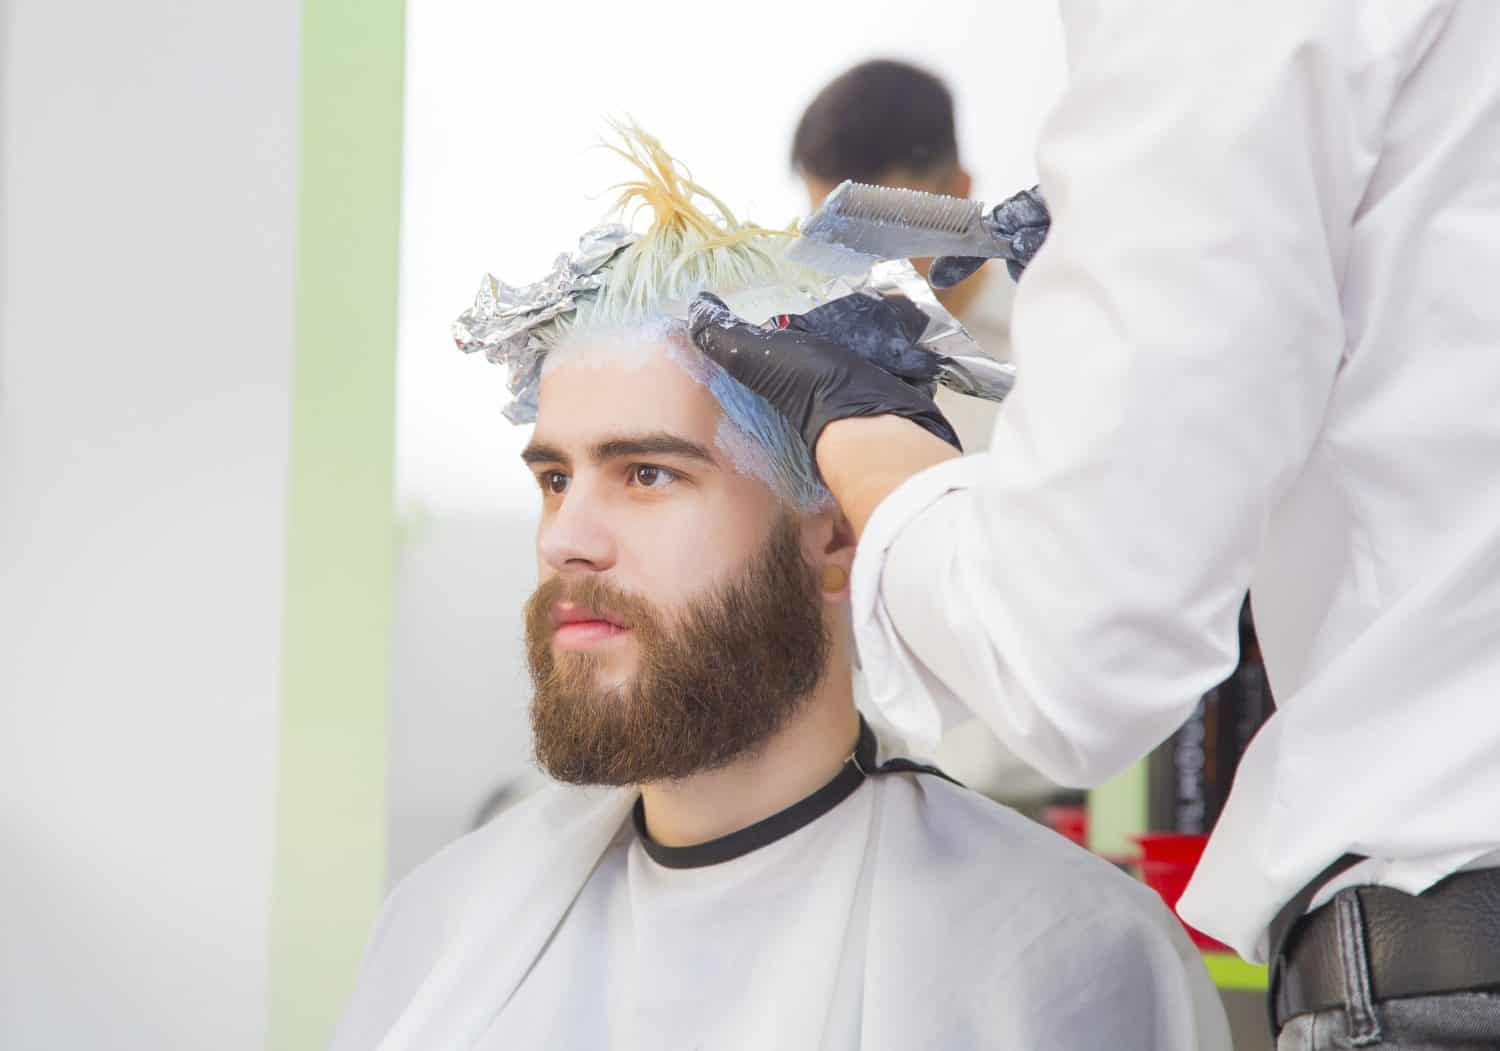 Process of a guy having his hair dyed at hairdresser.